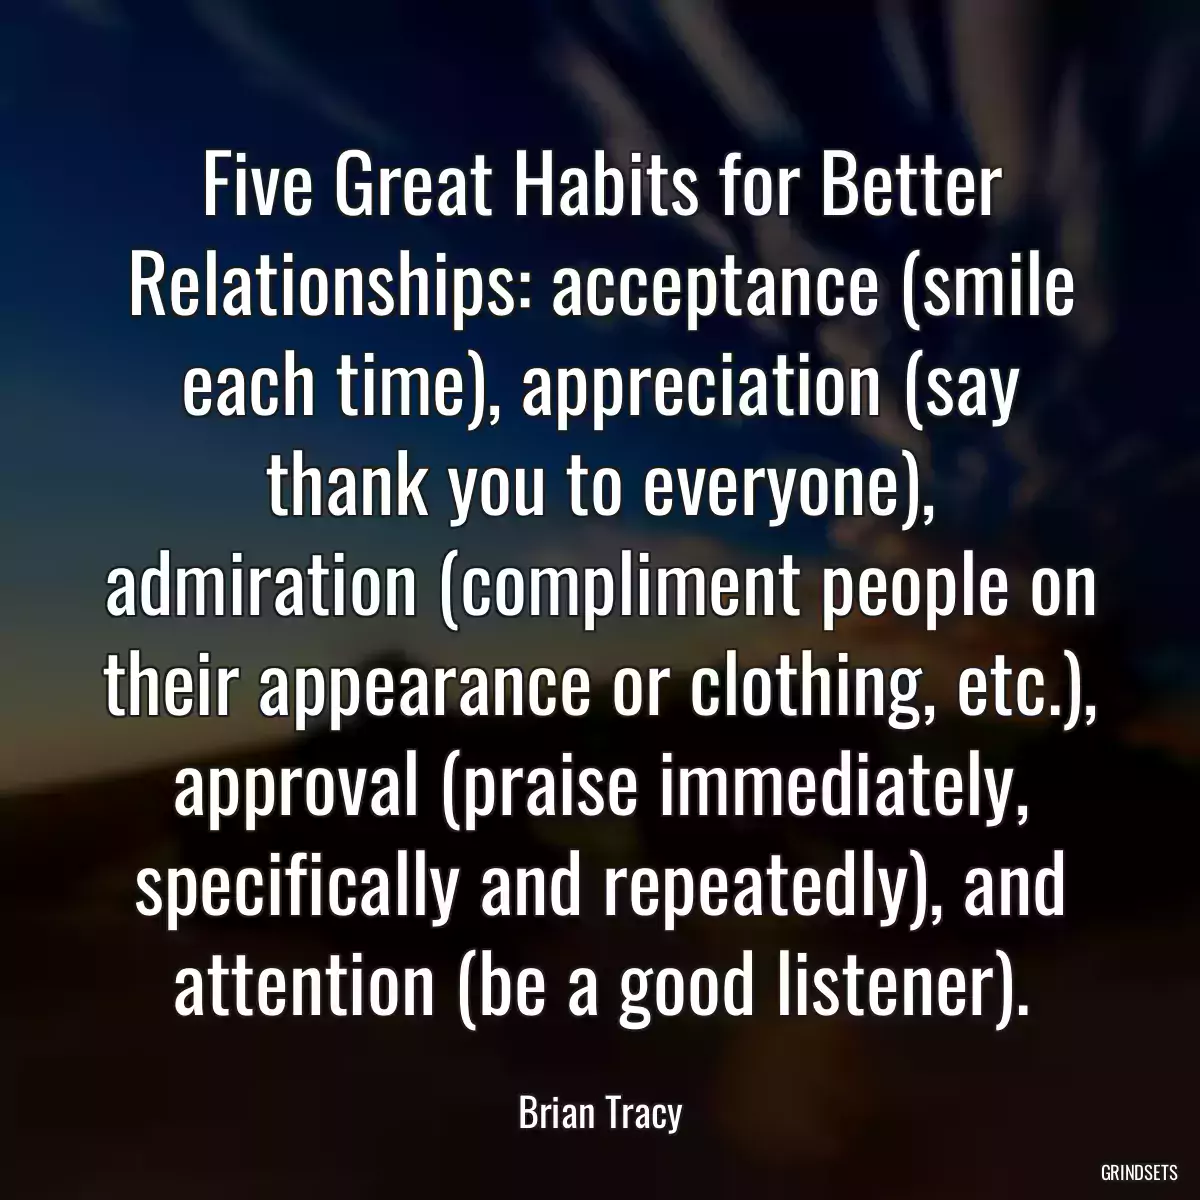 Five Great Habits for Better Relationships: acceptance (smile each time), appreciation (say thank you to everyone), admiration (compliment people on their appearance or clothing, etc.), approval (praise immediately, specifically and repeatedly), and attention (be a good listener).